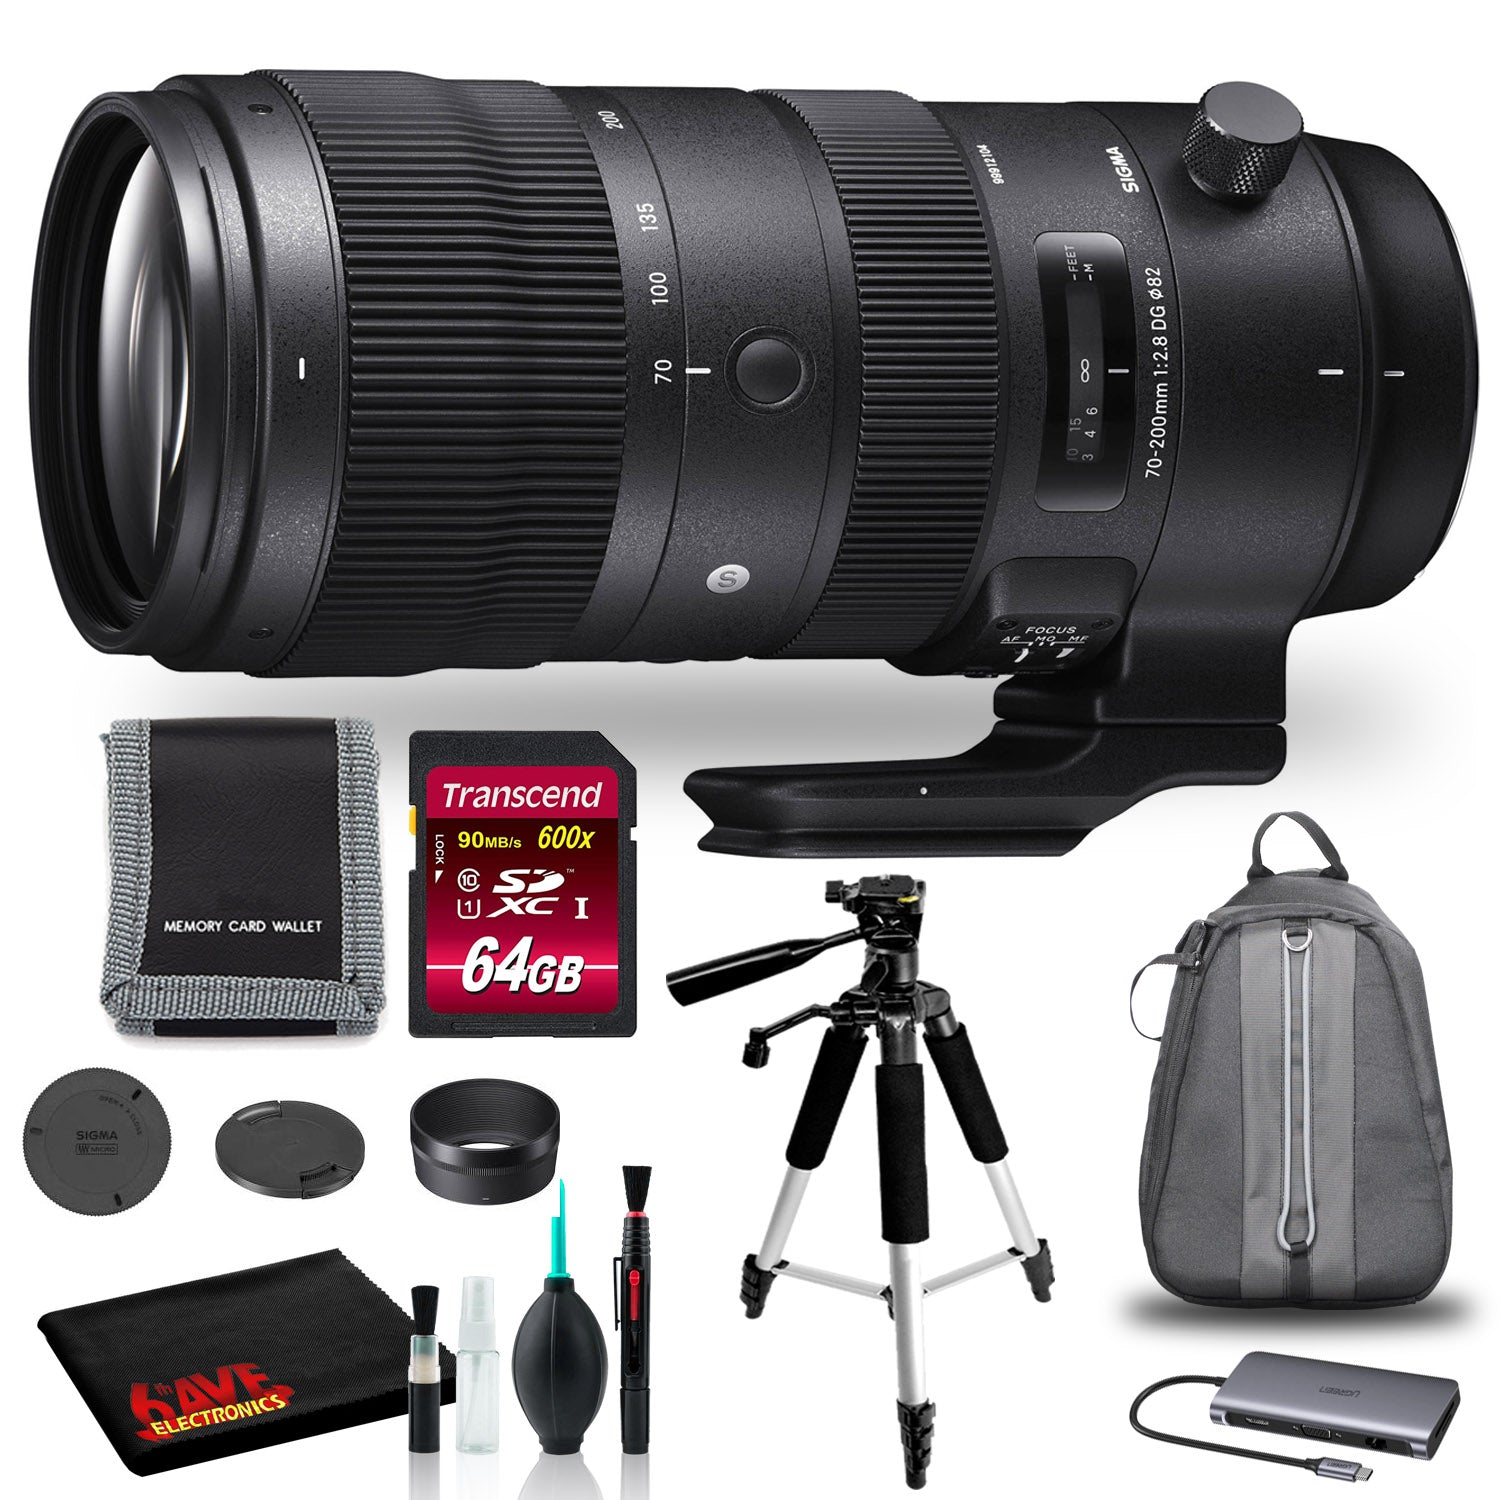 Sigma 70-200mm DG OS HSM Sports Lens for Nikon F with Backpack, 64GB SD Bundle